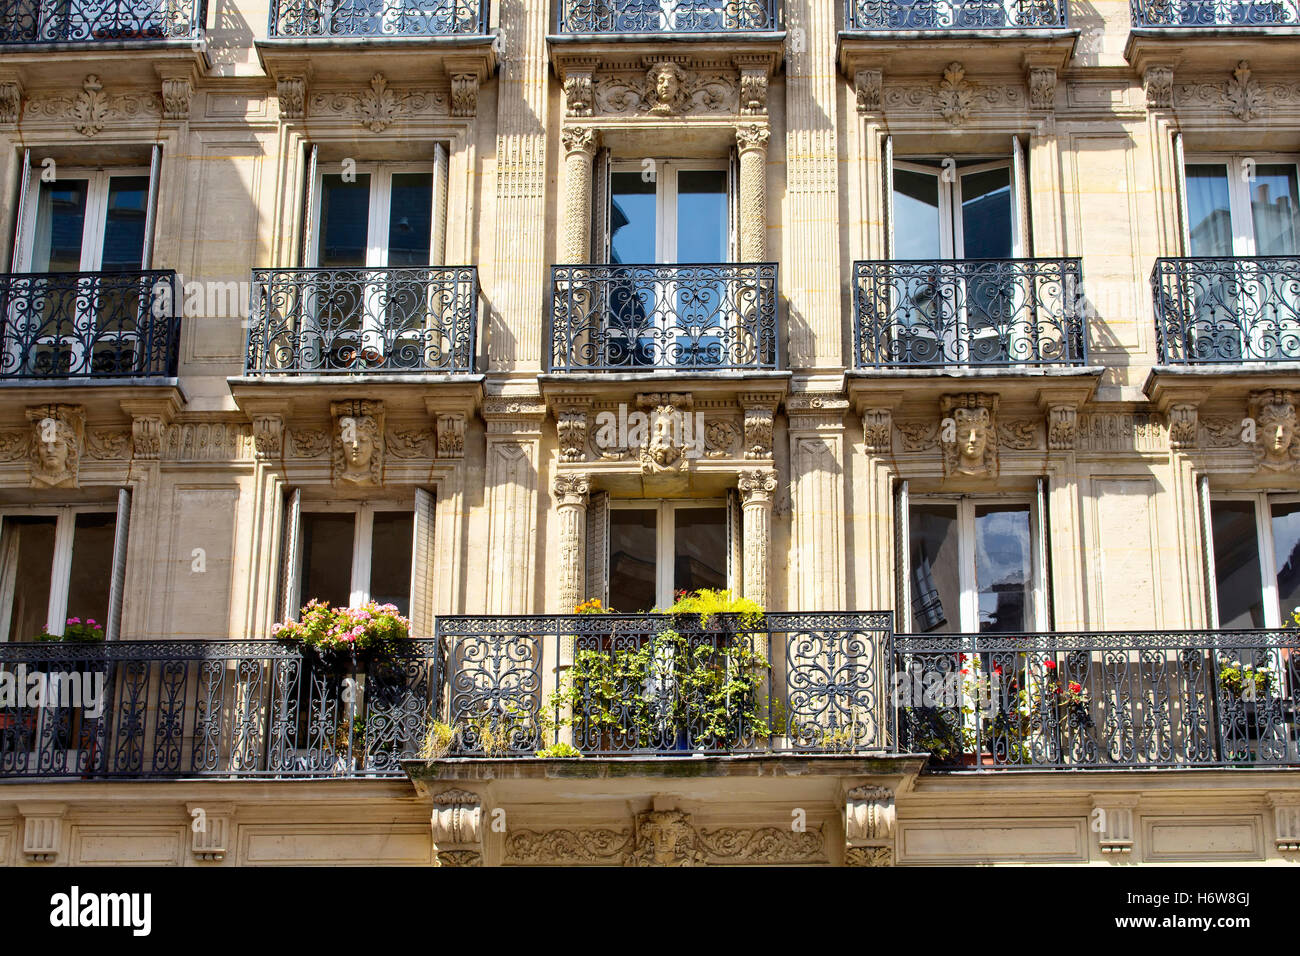 View of a traditional building in Paris showing French architectural style. Carvings and iron work balconies and some flowers cr Stock Photo